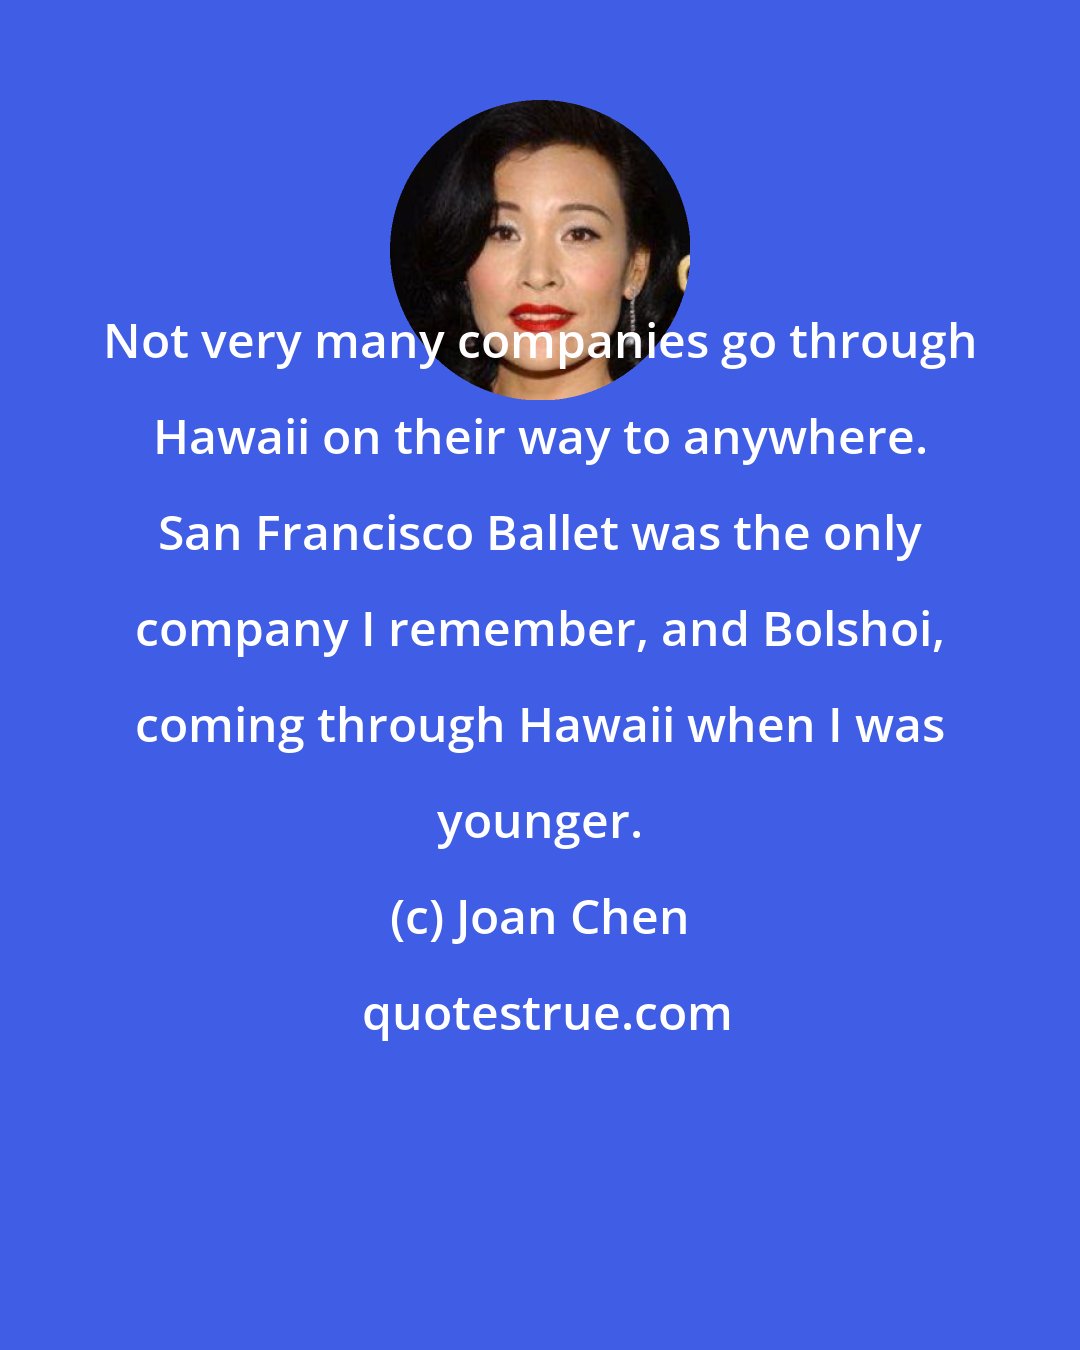 Joan Chen: Not very many companies go through Hawaii on their way to anywhere. San Francisco Ballet was the only company I remember, and Bolshoi, coming through Hawaii when I was younger.